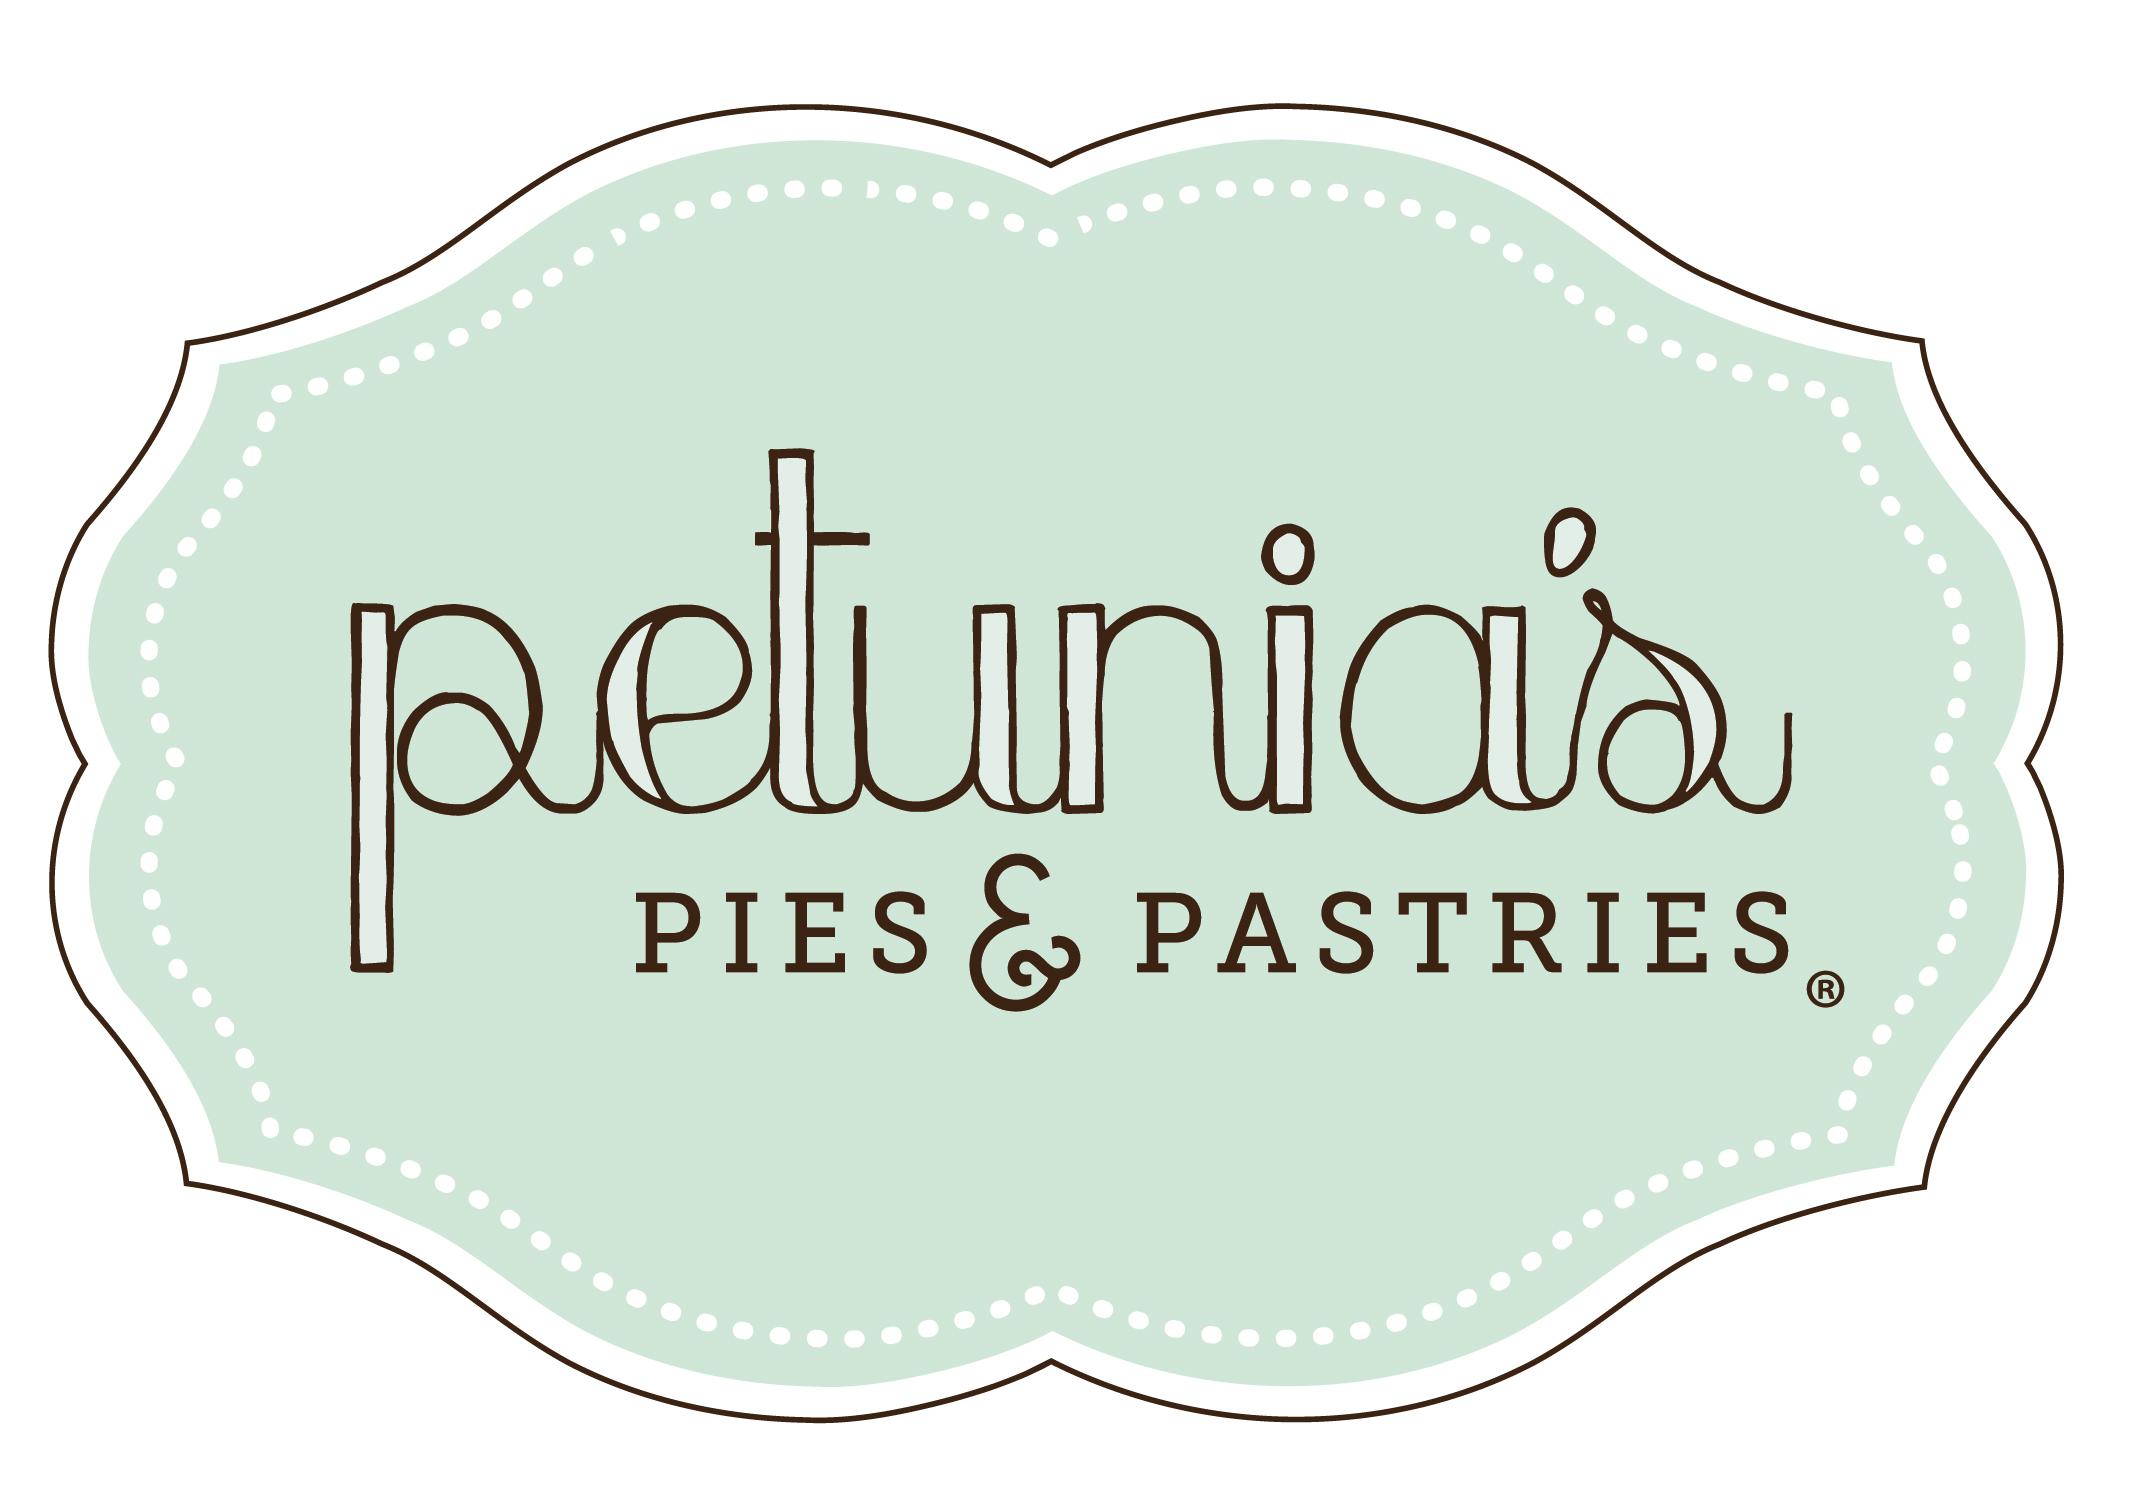 Petunia's Pies and Pastries Portland